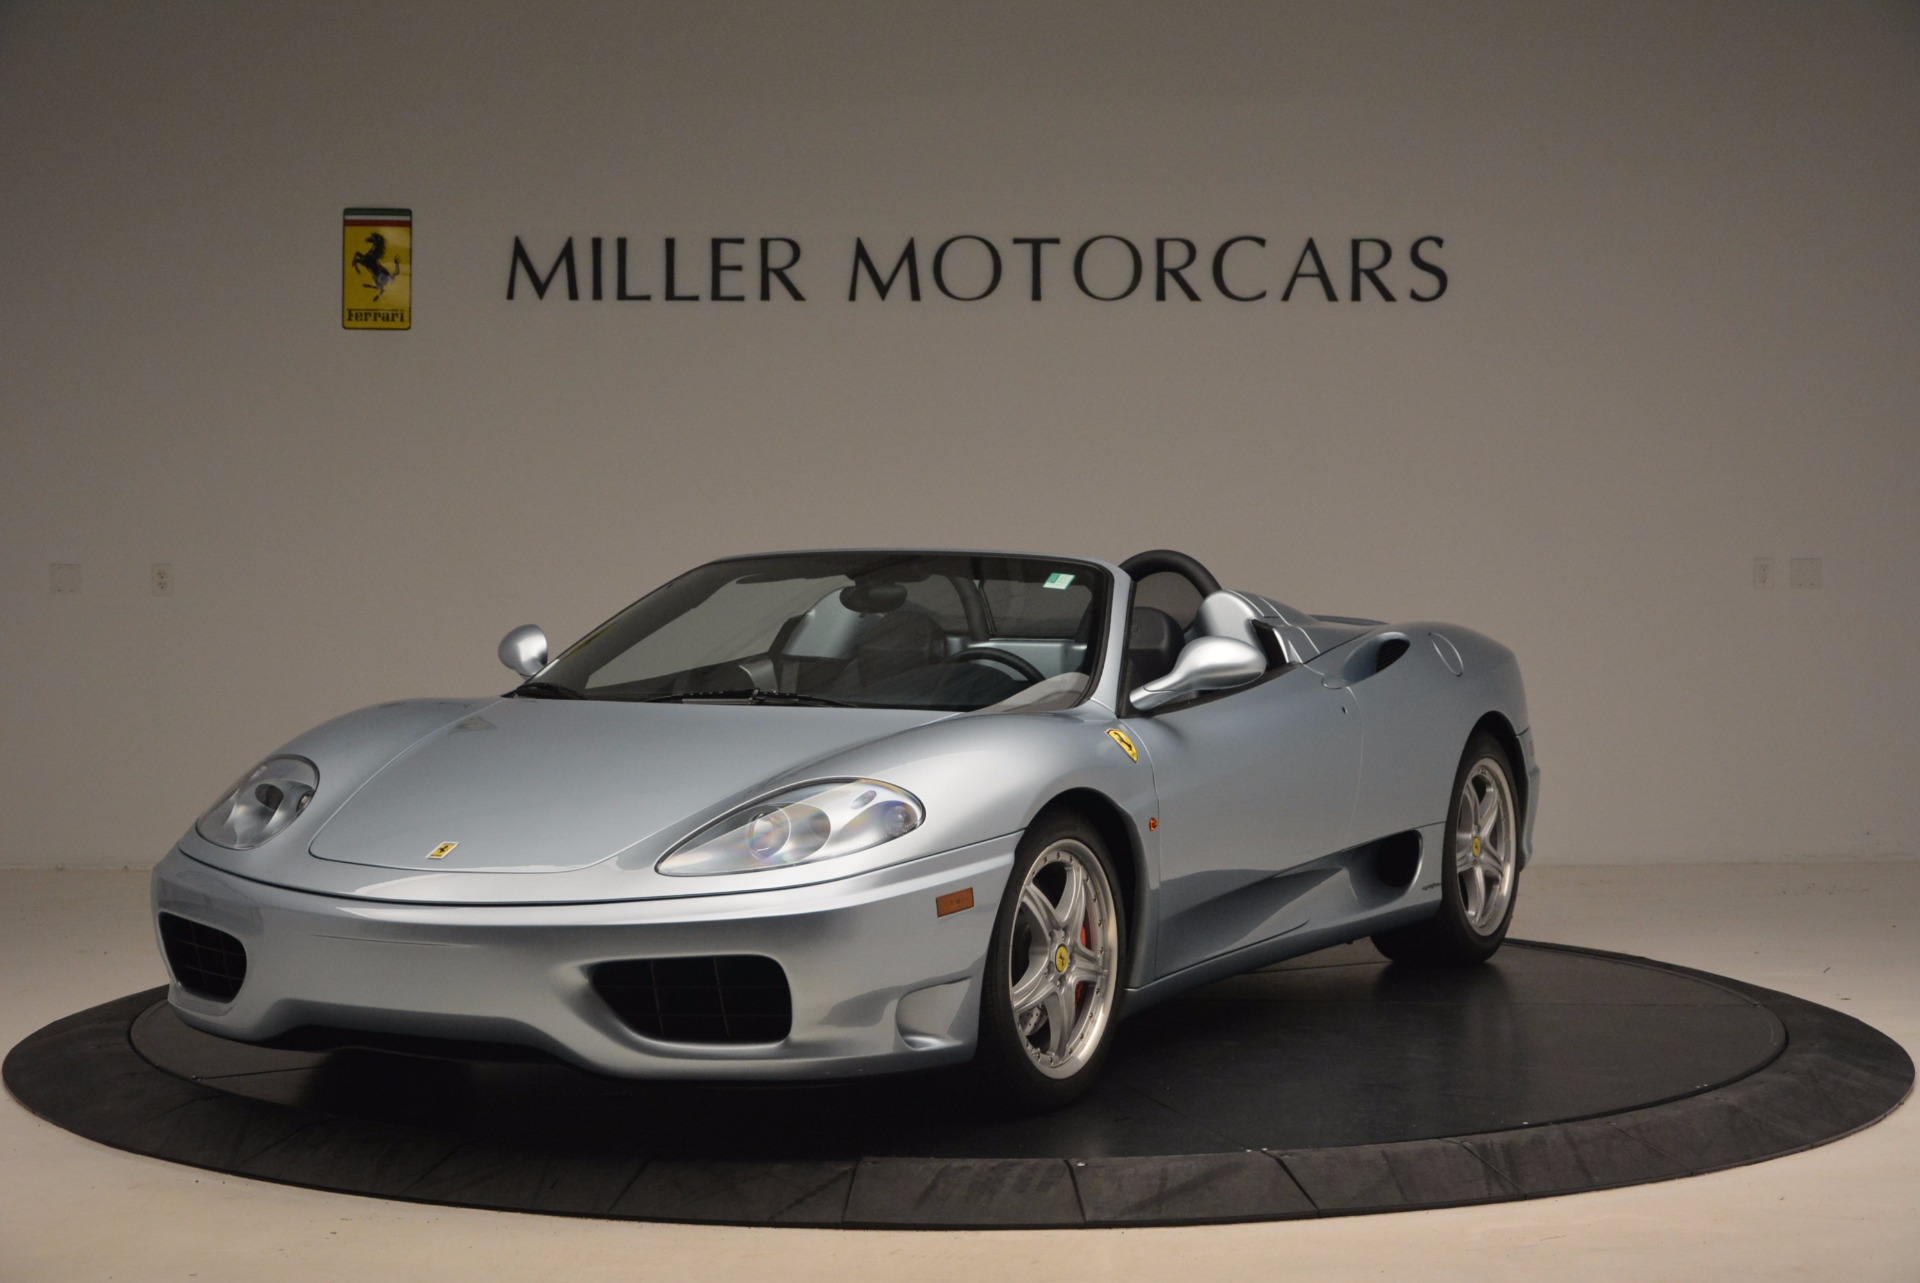 Used 2003 Ferrari 360 Spider 6-Speed Manual for sale Sold at Rolls-Royce Motor Cars Greenwich in Greenwich CT 06830 1